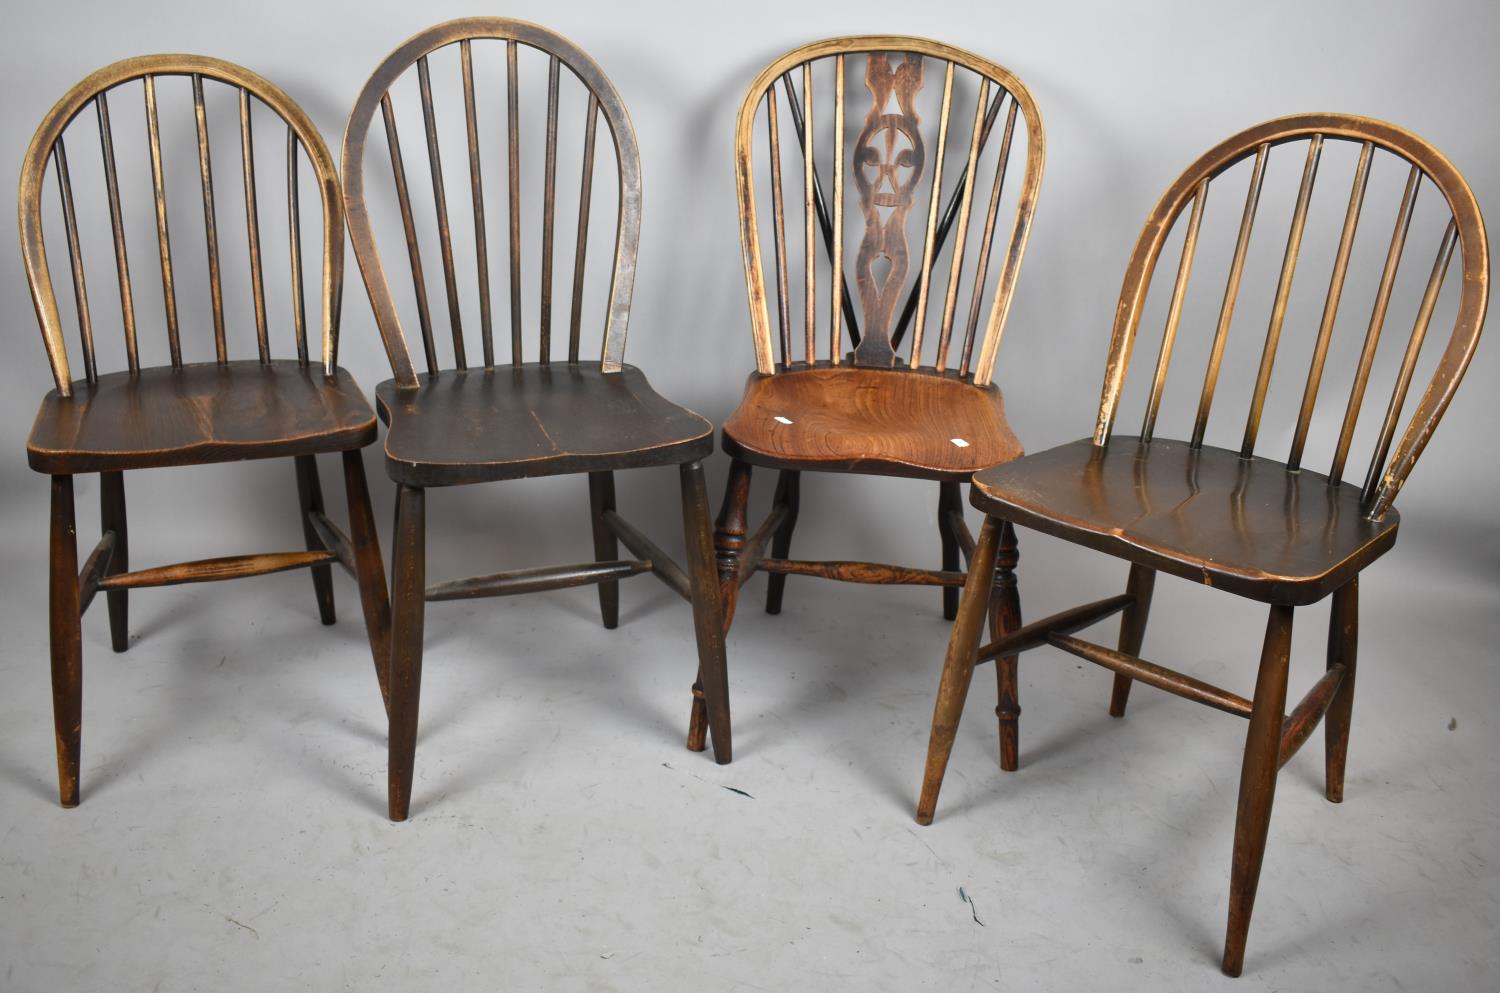 Three Hooped Spindle Back Kitchen Chairs to Include Ercol and One Fleur De Lys Spindle Back with Elm